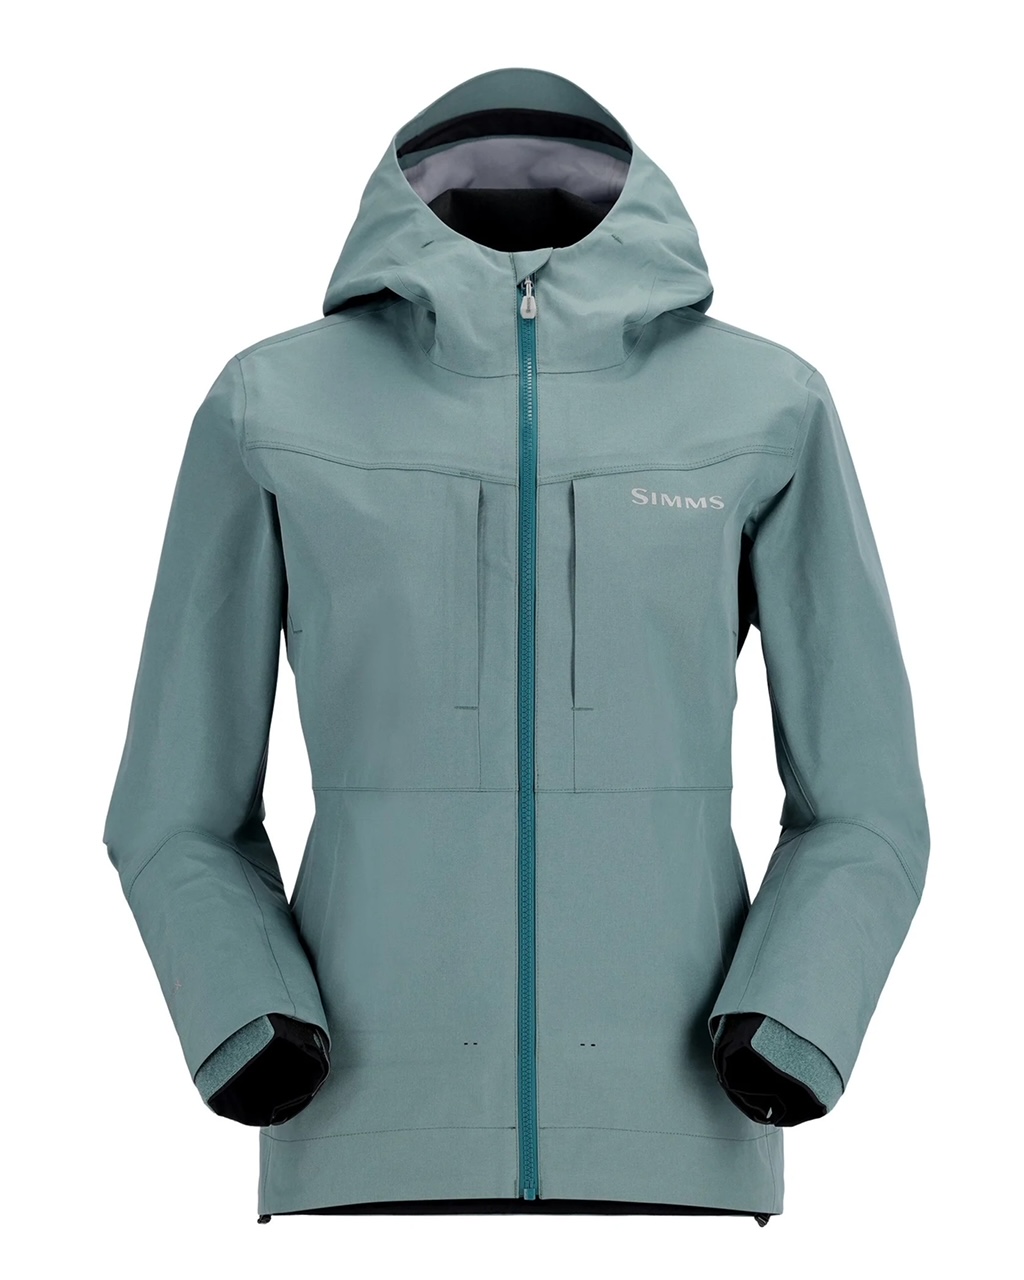 Simms W's G3 Guide Fishing Jacket - Avalon Teal - Small